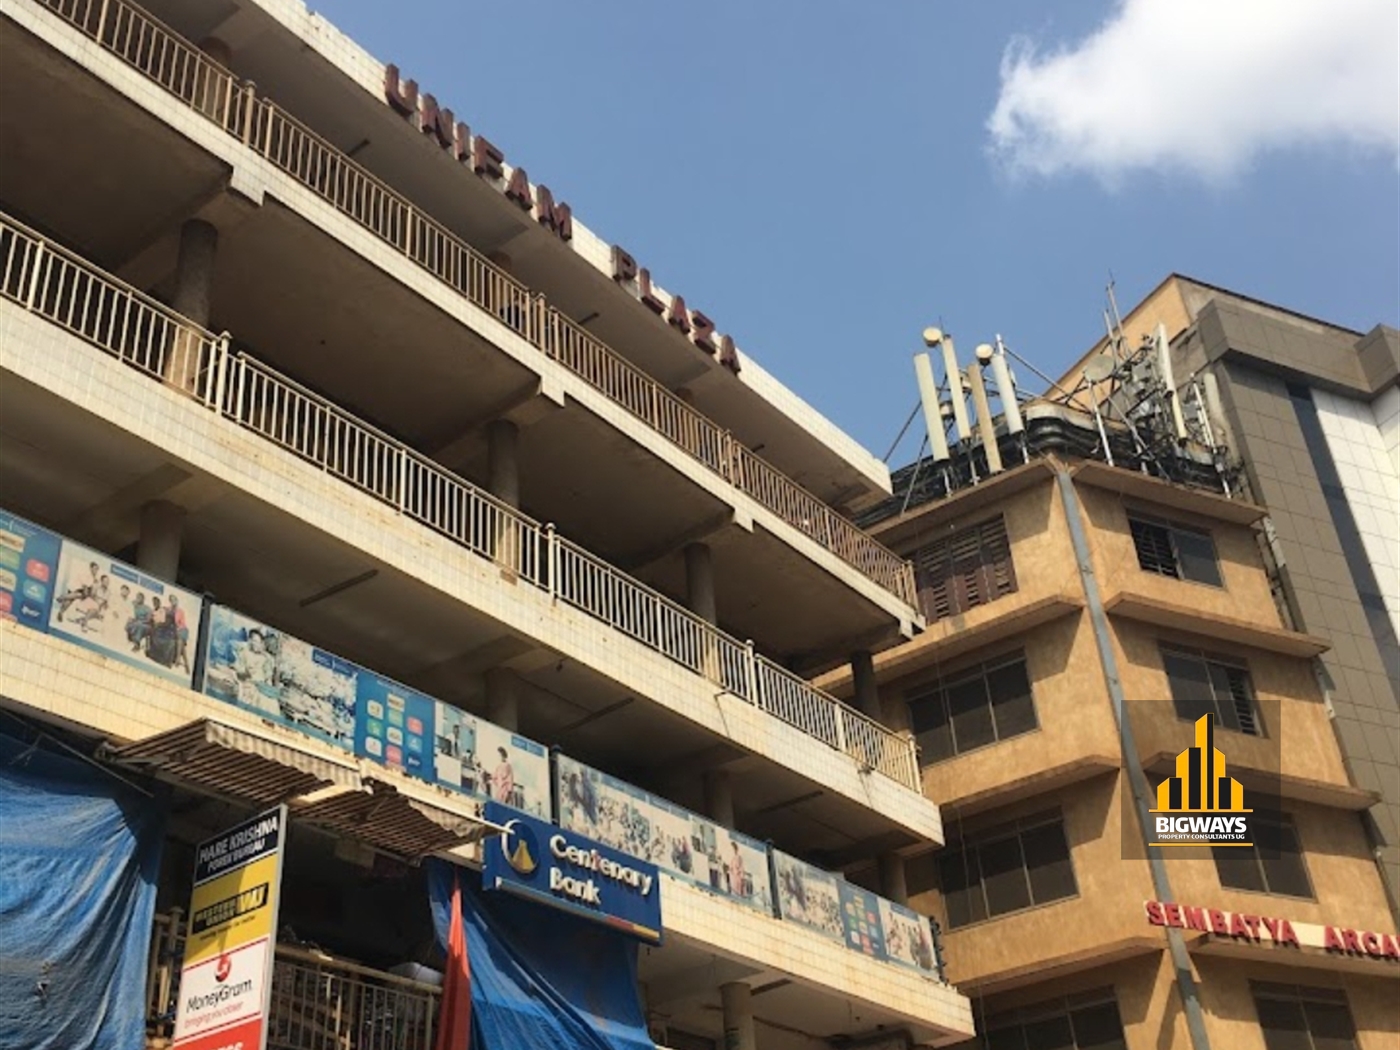 Commercial block for sale in Nakivubo Kampala